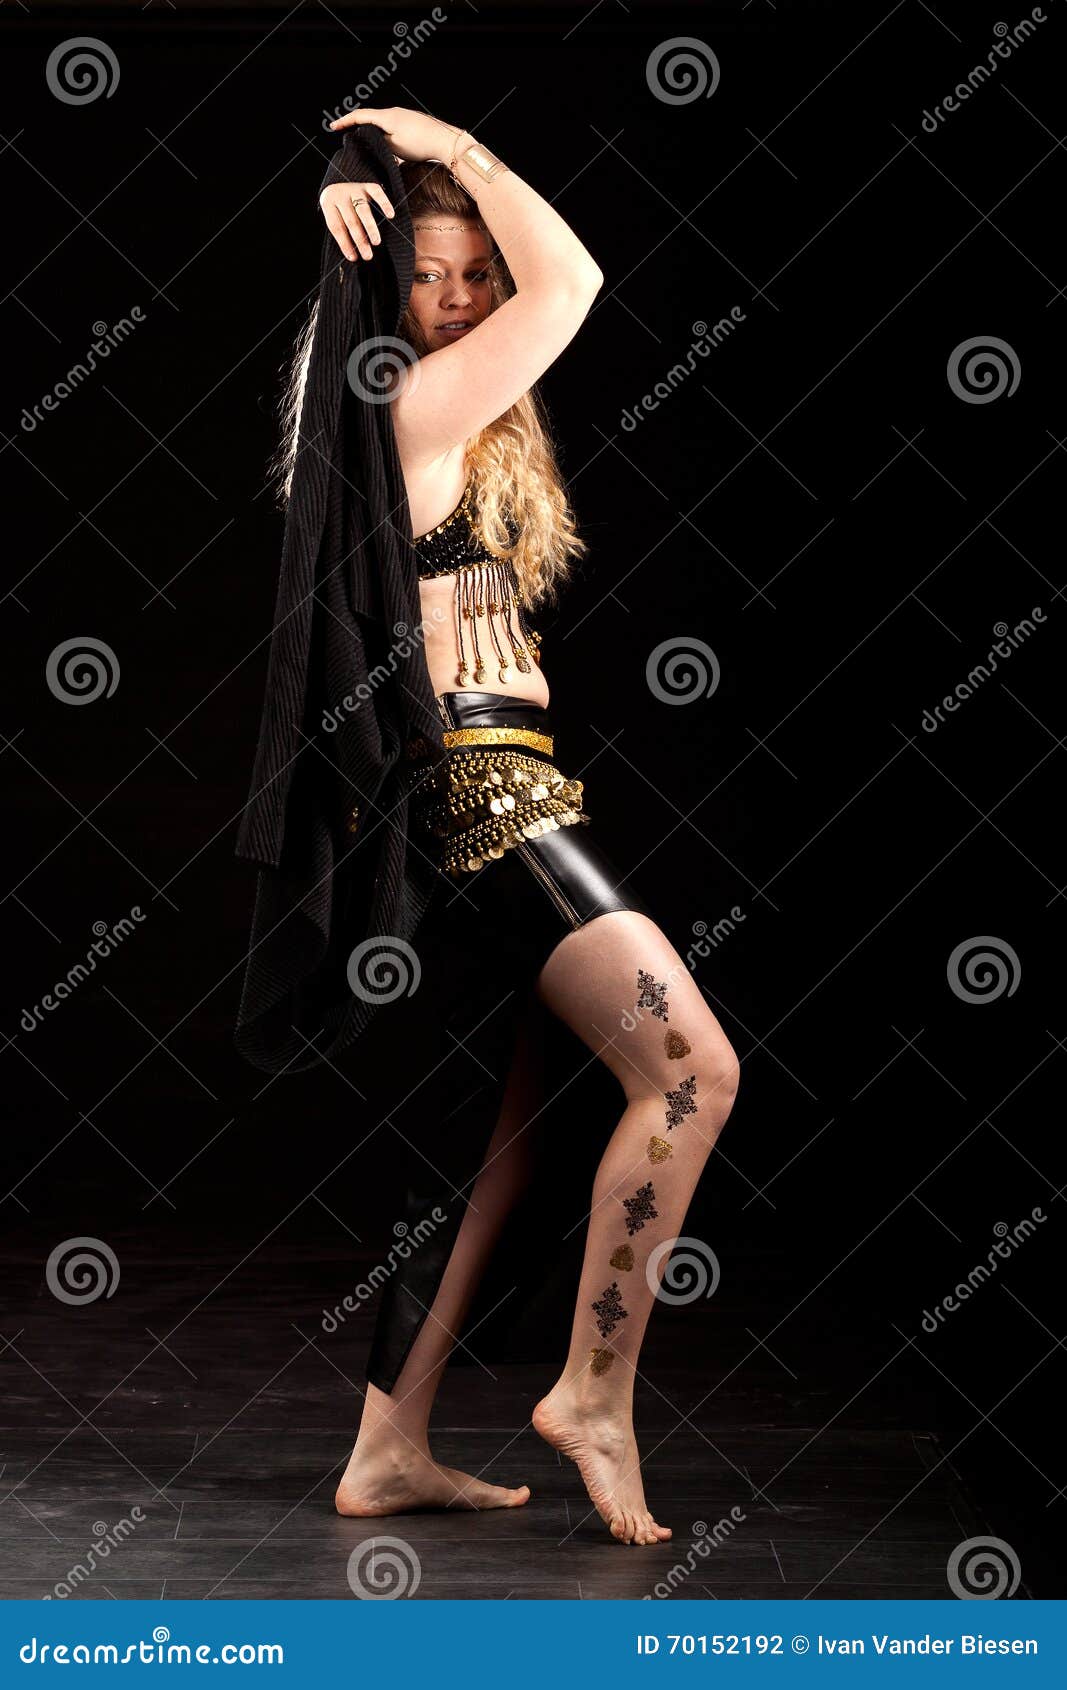 Pin on Belly dancing